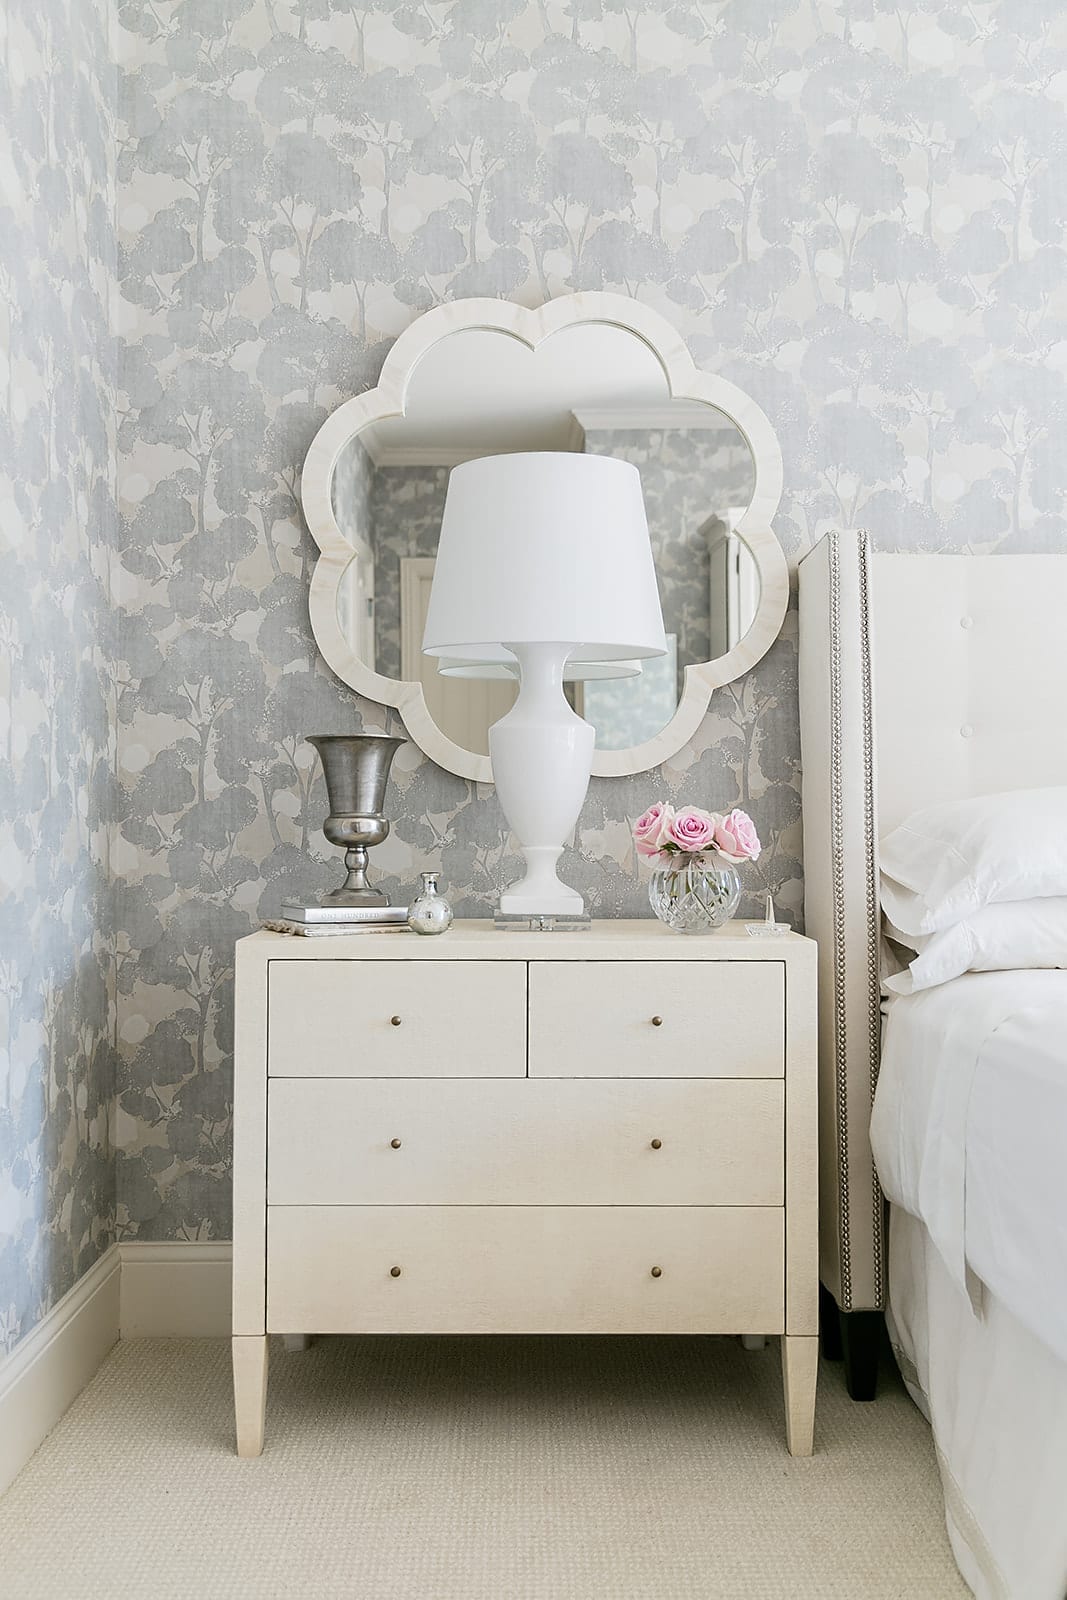 Bedroom Nightstand Decor with ivory quatrefoil mirror, white desk lamp and soft pink flowers with light lavender floral wallpaper.